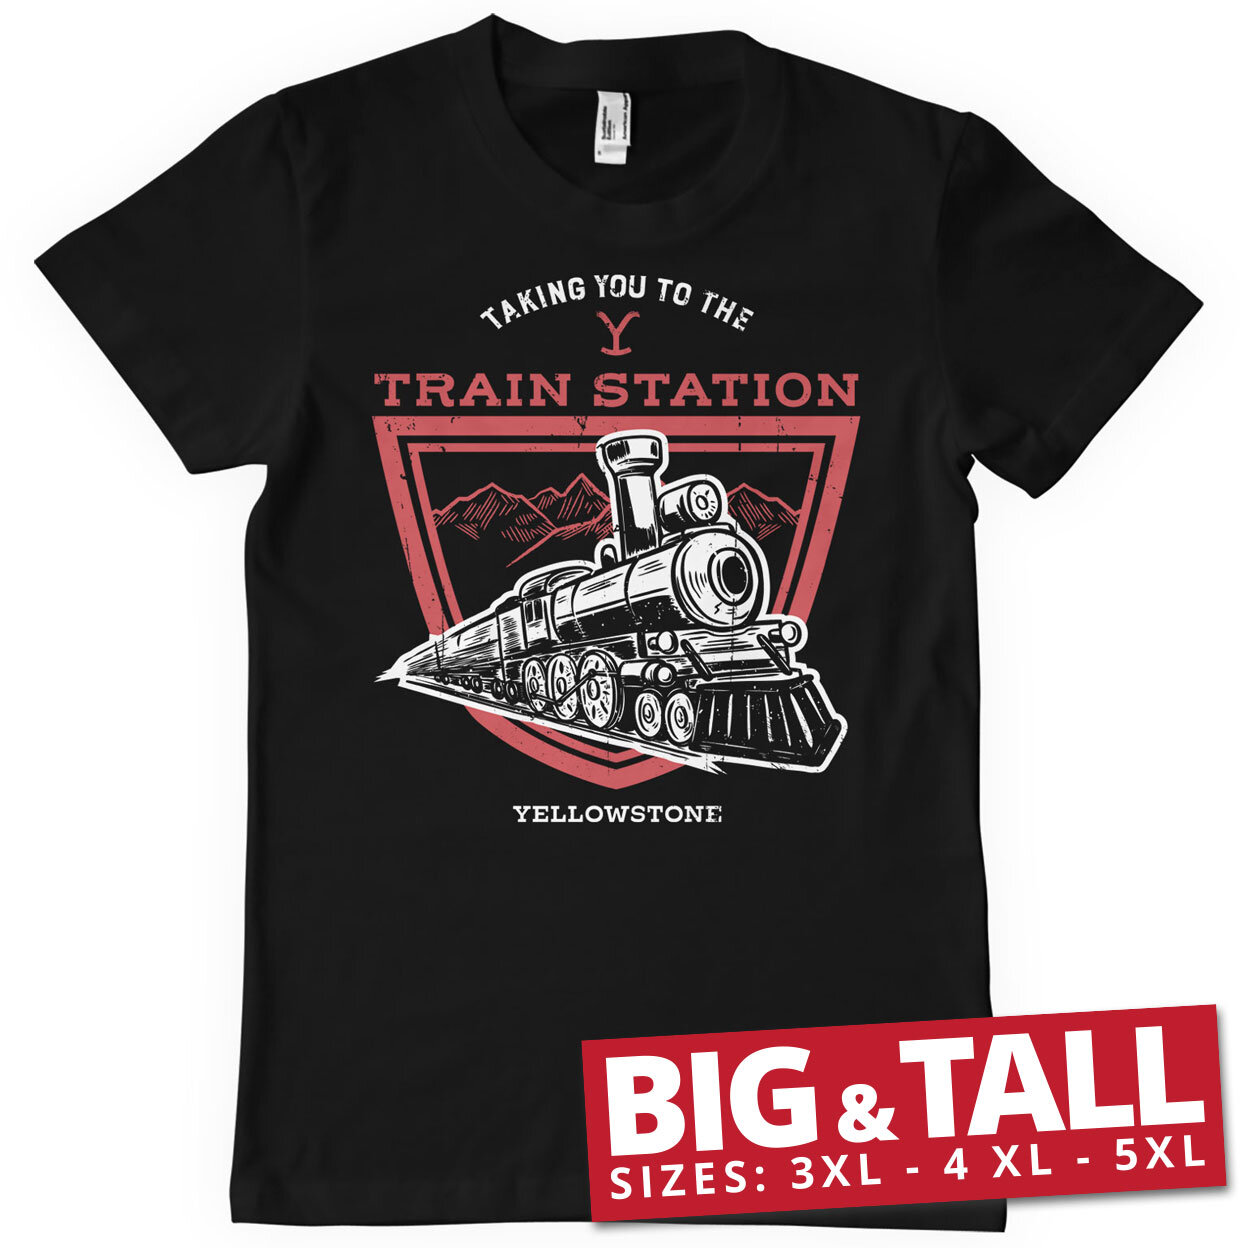 Taking You To The Train Station Big & Tall T-Shirt